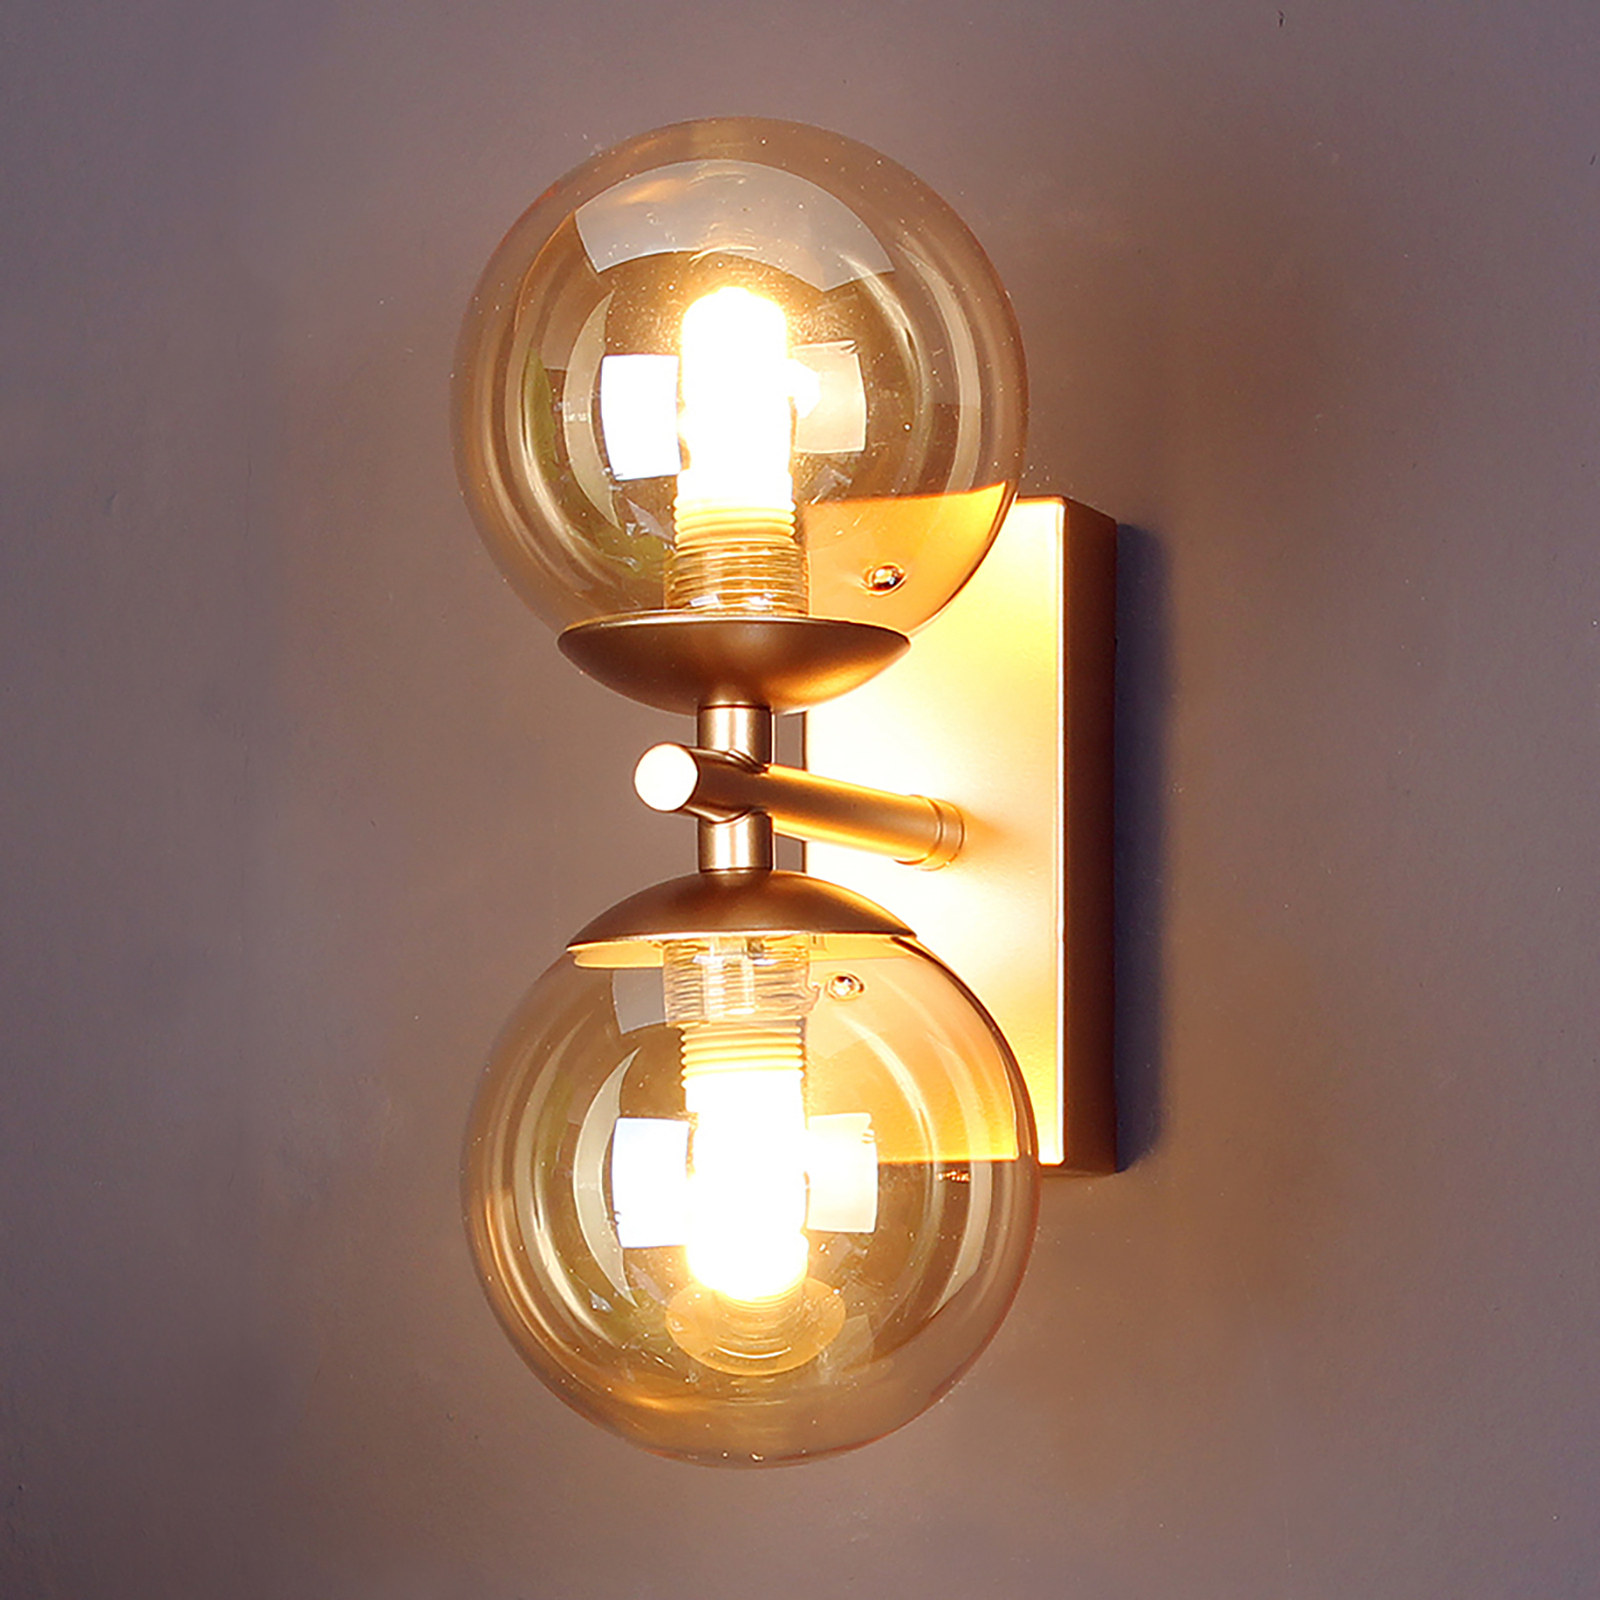 Neptune wall light 2-bulb gold with glass globes